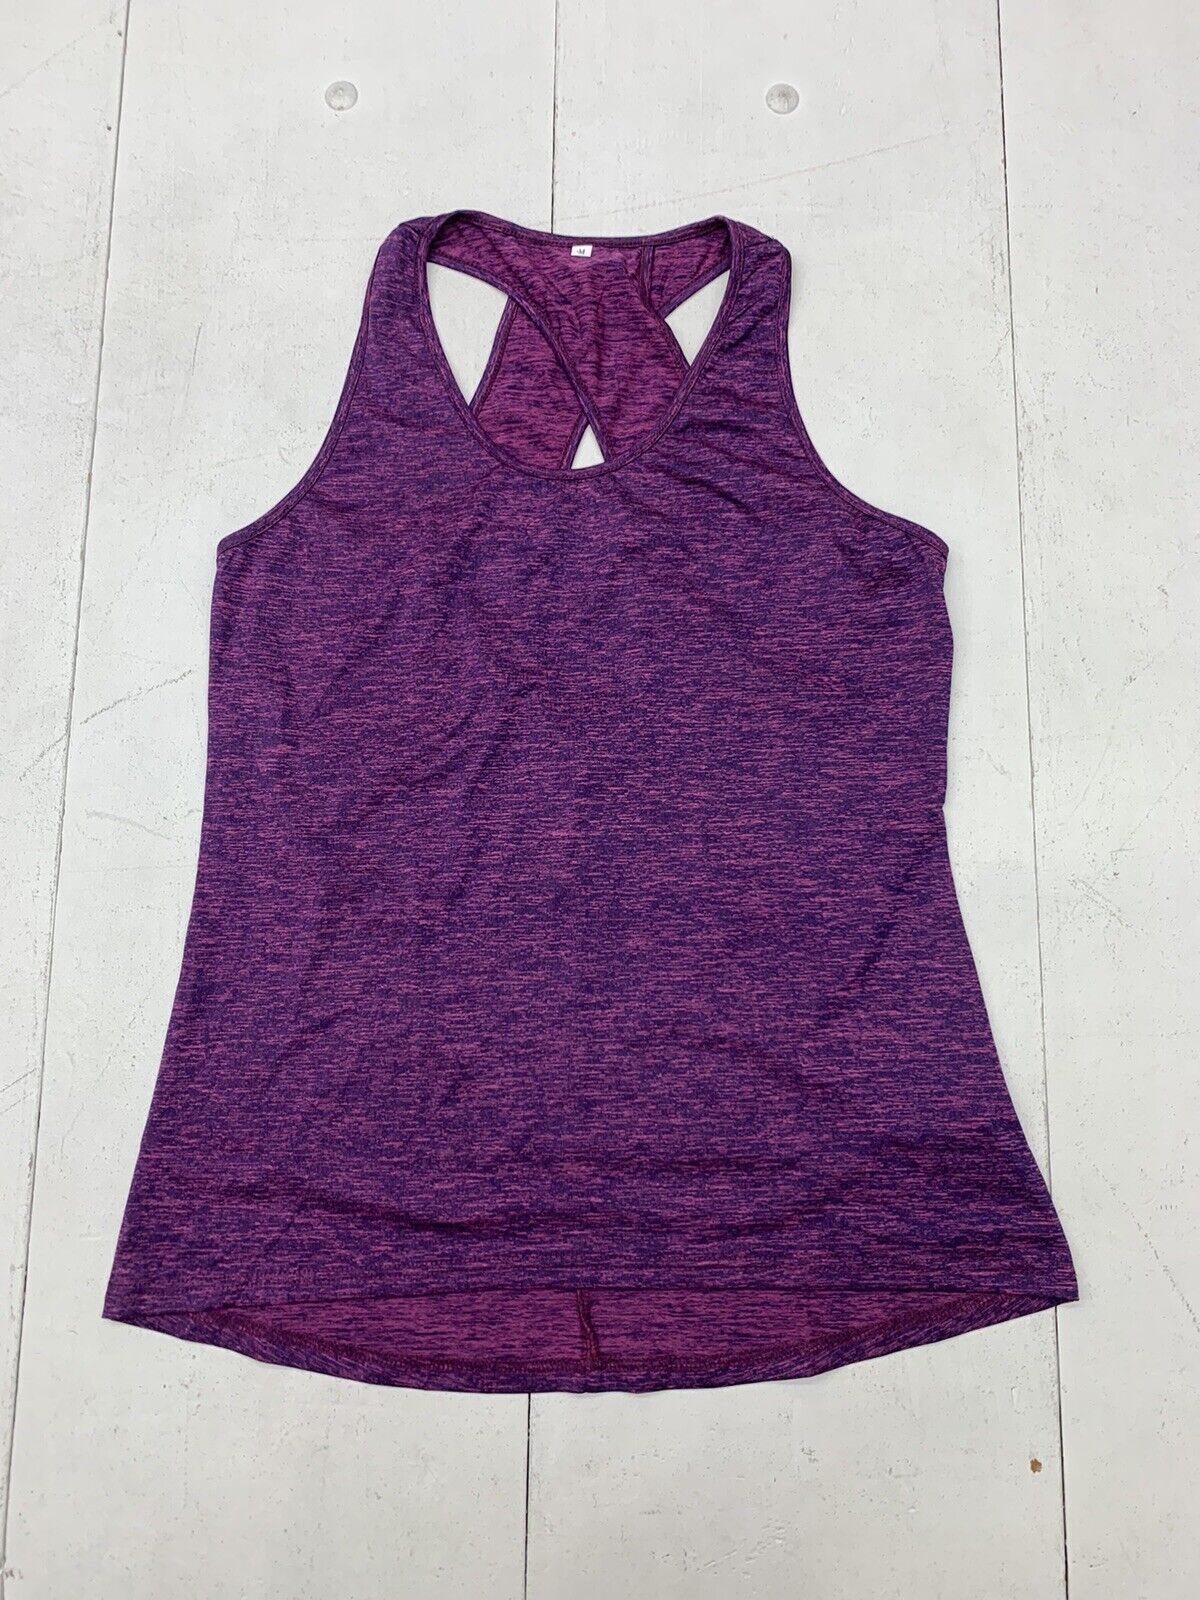 Vogo Activewear Tops for Women for sale